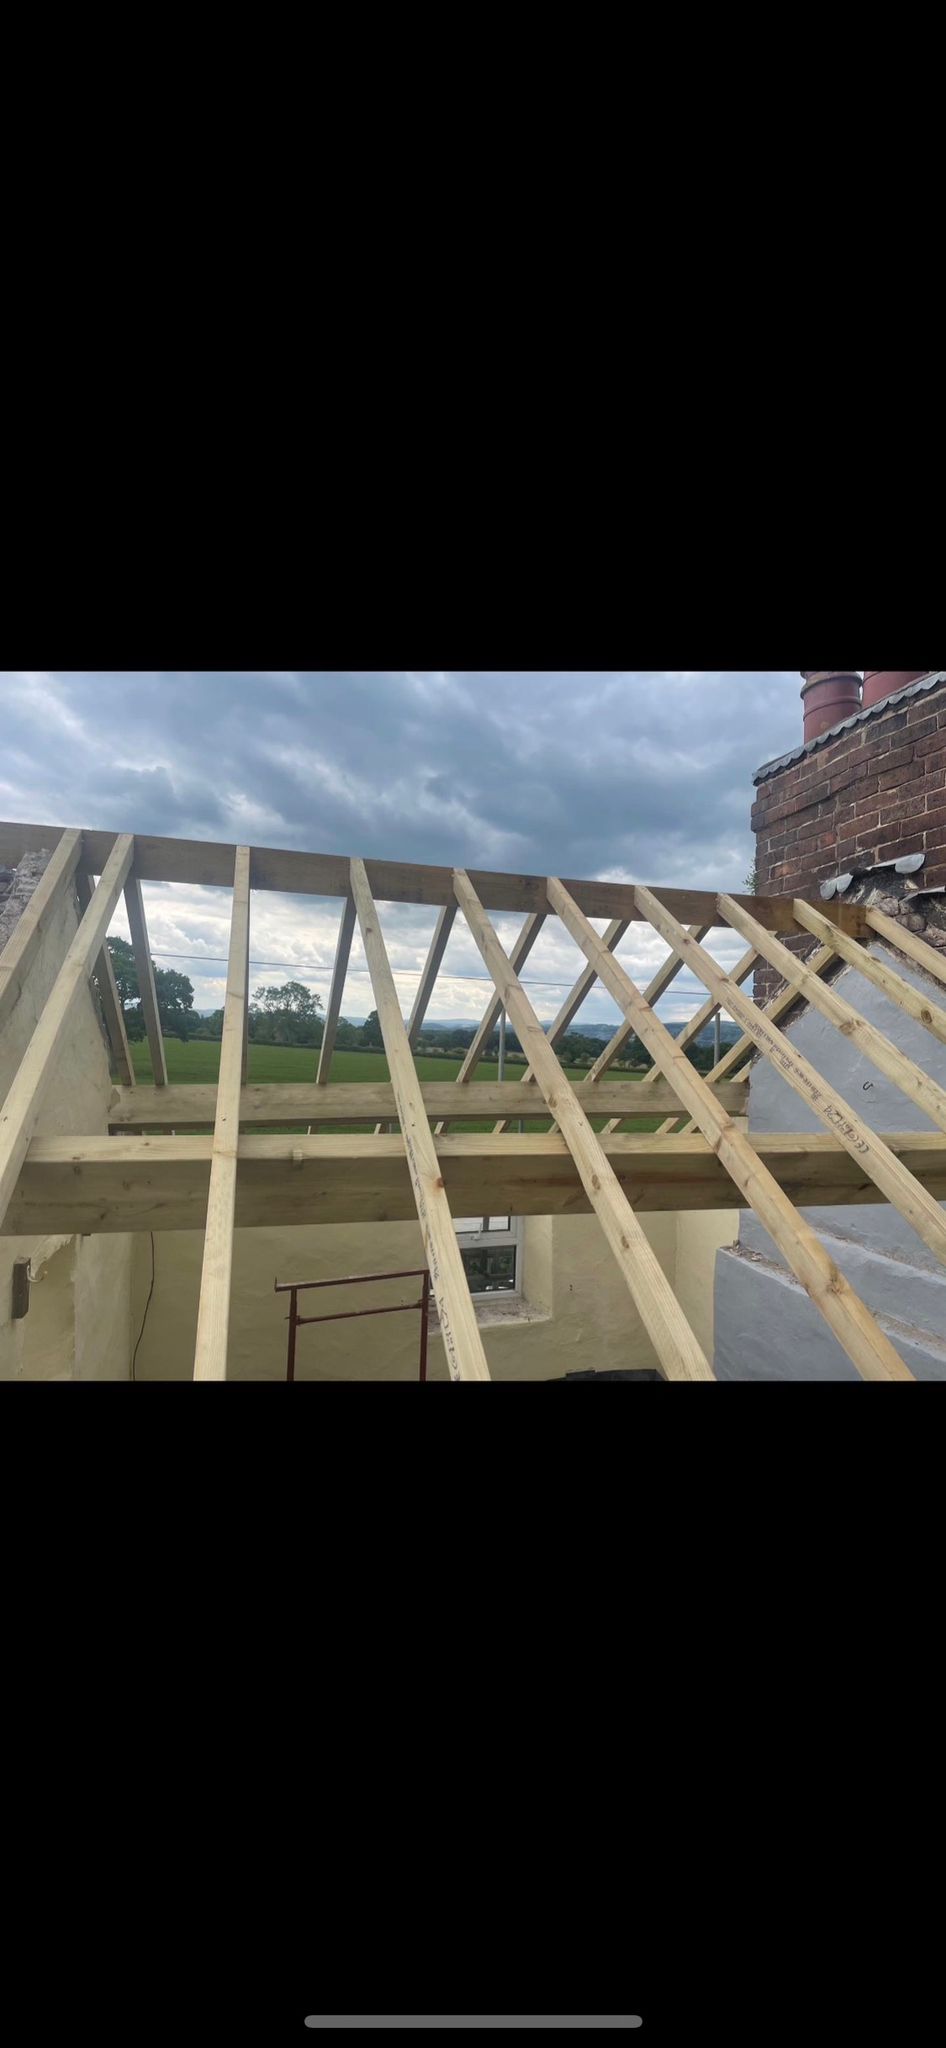 Timberwork Roof Contractors Bryncir, LL51 - DD Roofing